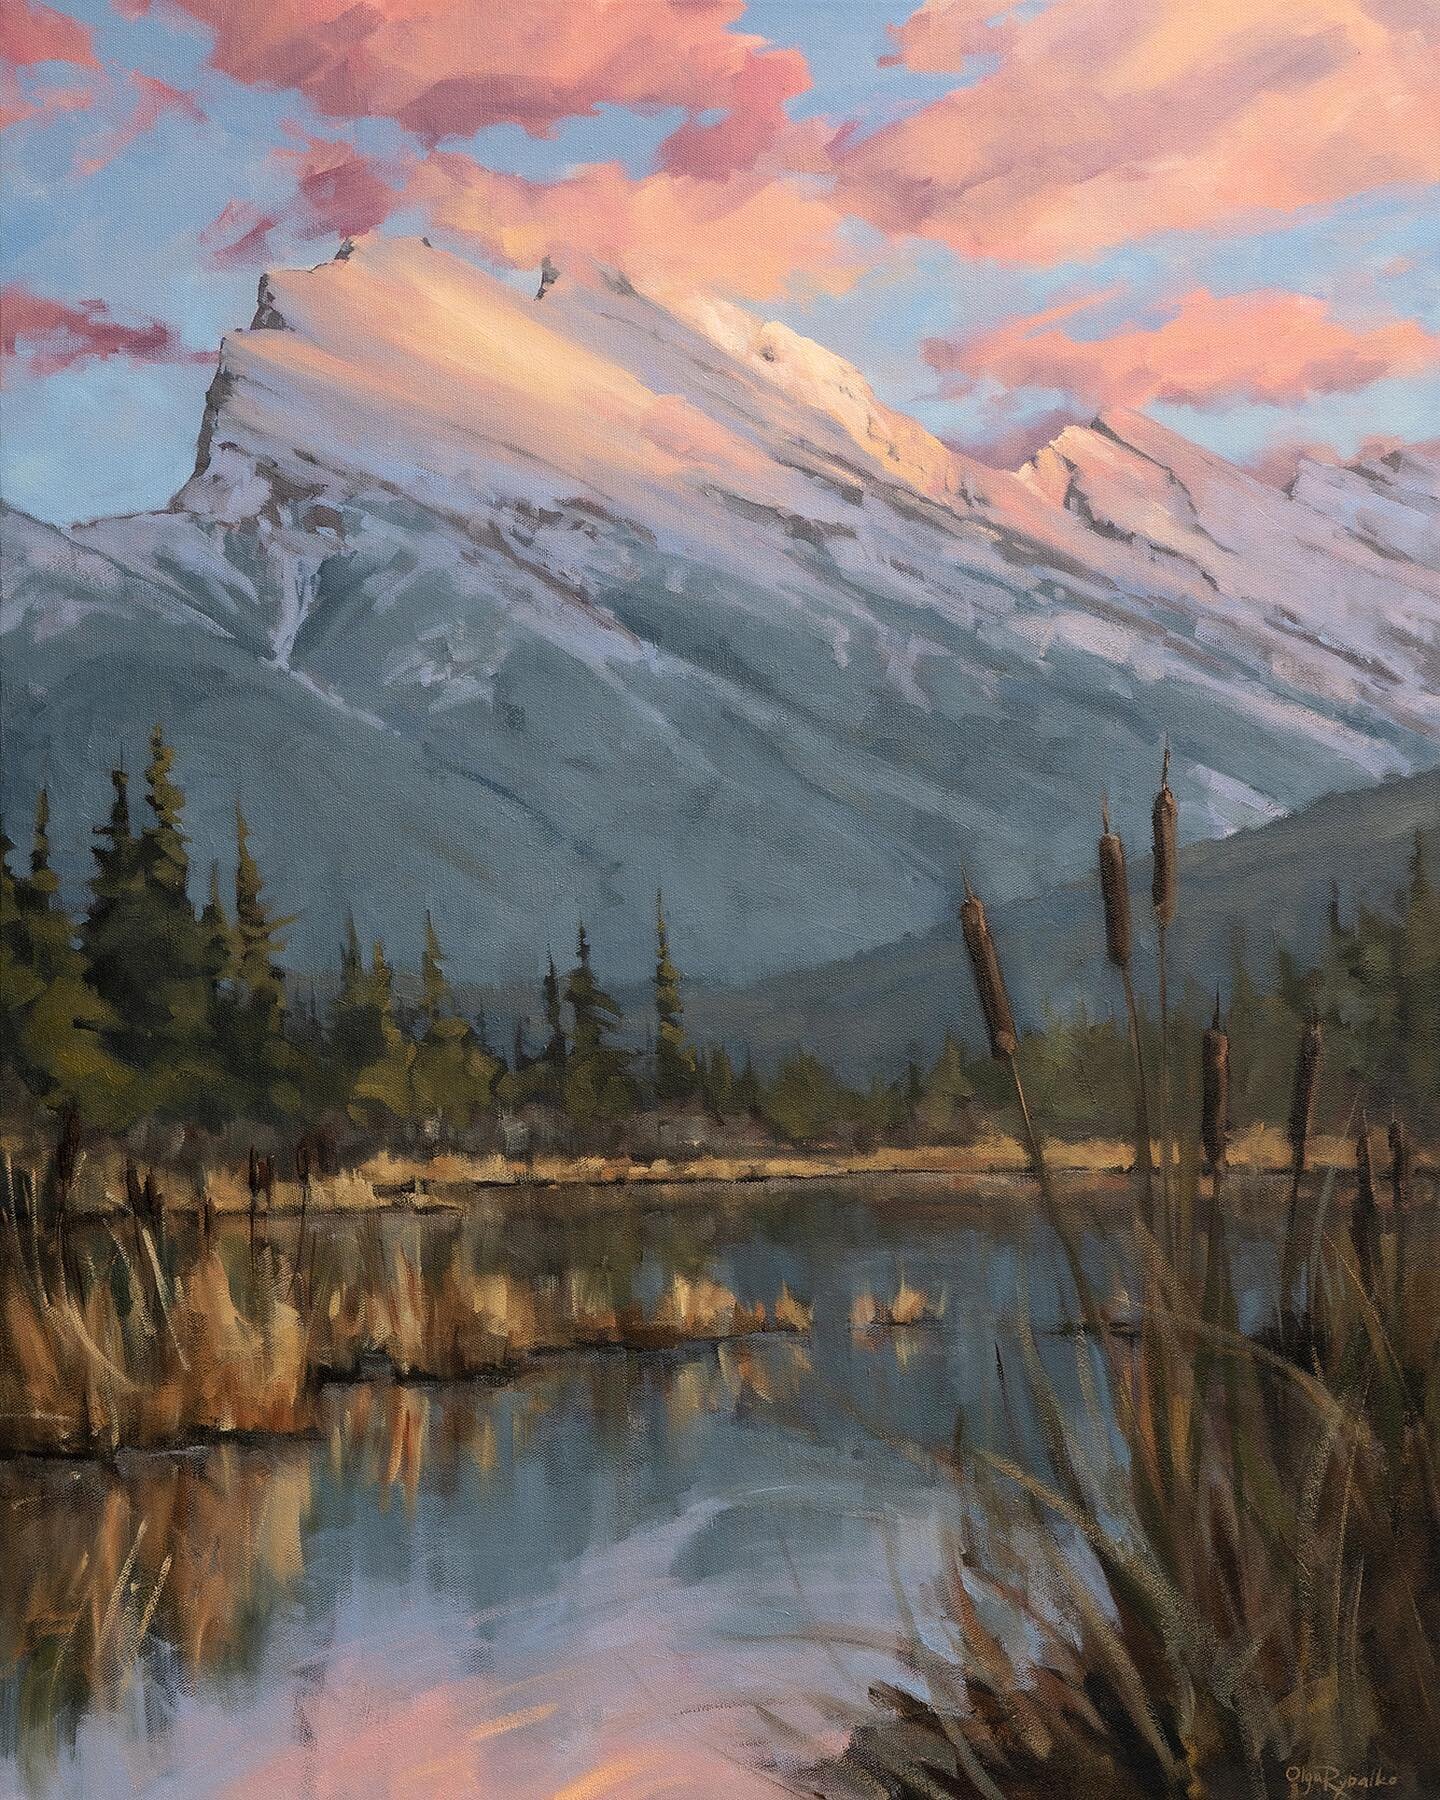 Here&rsquo;s an image of the finished painting from the progress shots in my previous post. 
.
Mount Rundle really is such an iconic Canadian scene! I&rsquo;ll never forget driving down Highway 1 and seeing it from the Vermilion Lakes viewpoint for t